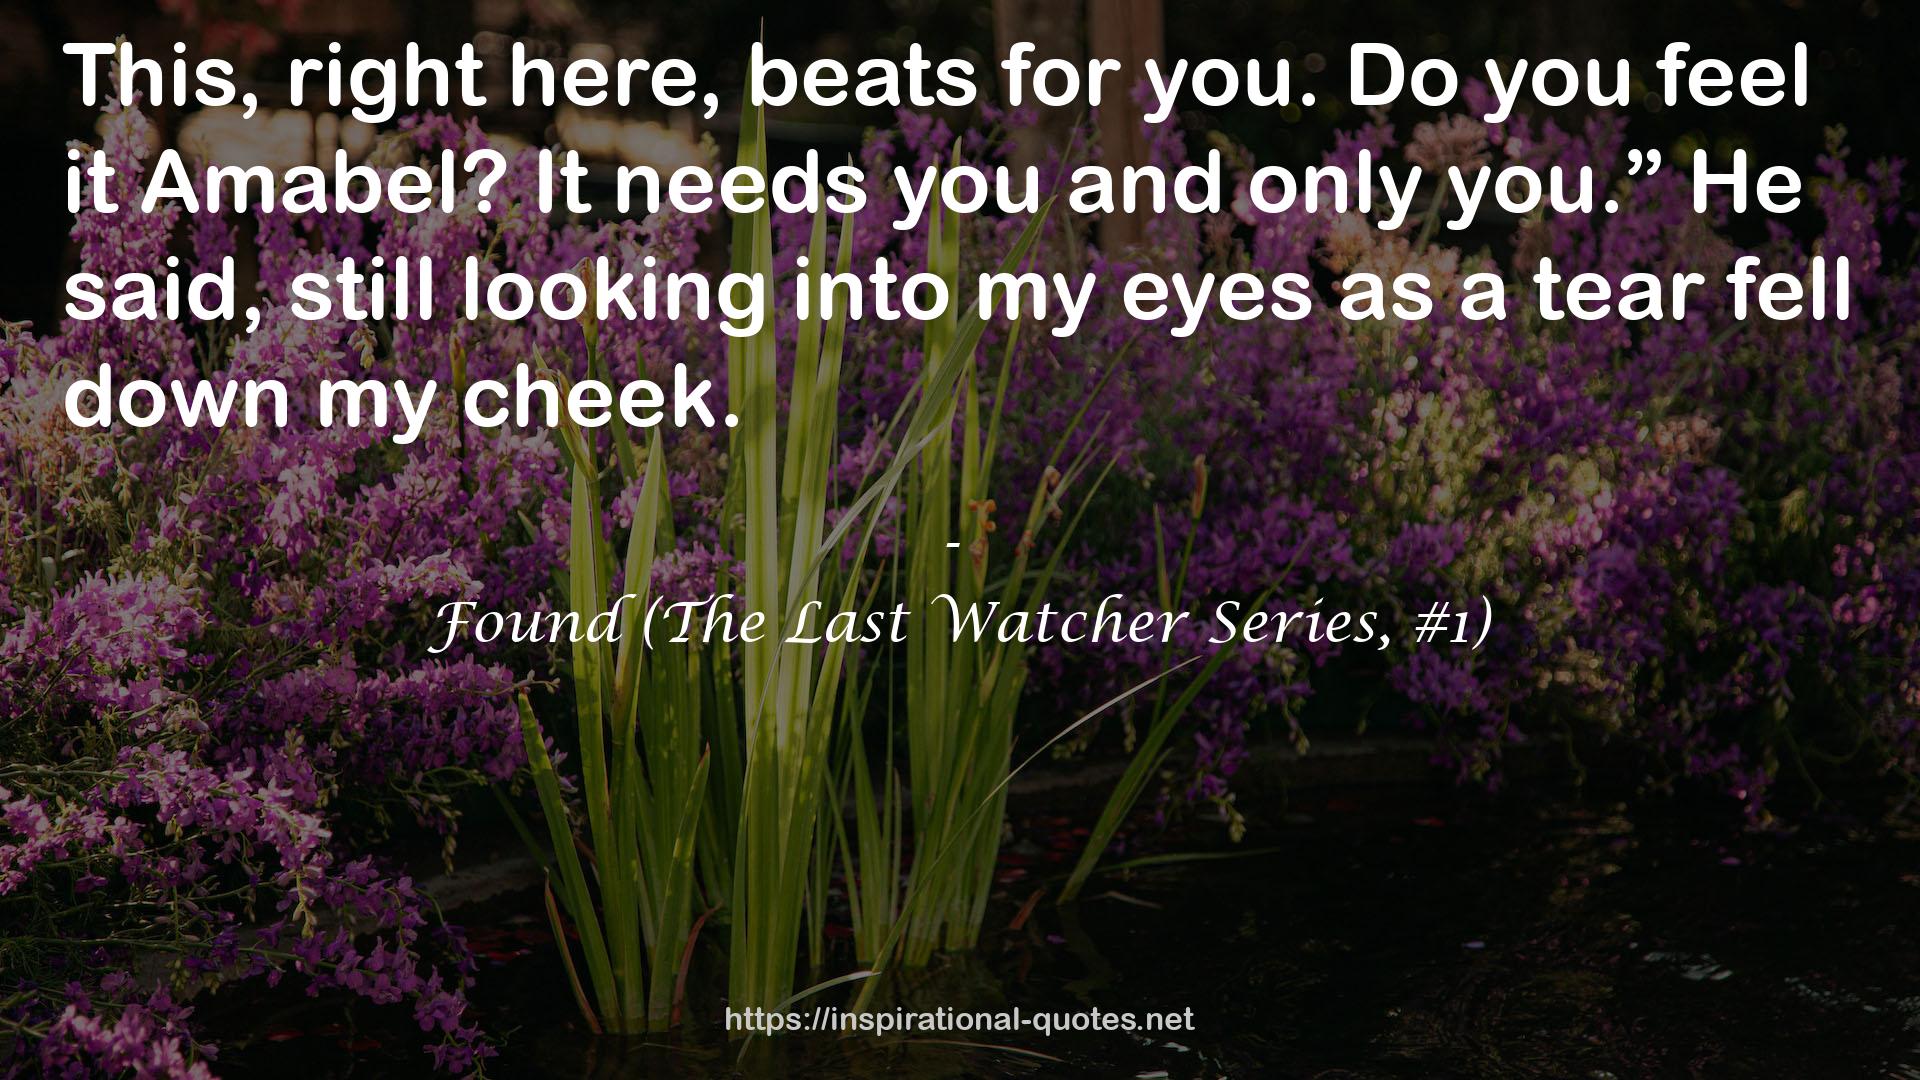 Found (The Last Watcher Series, #1) QUOTES